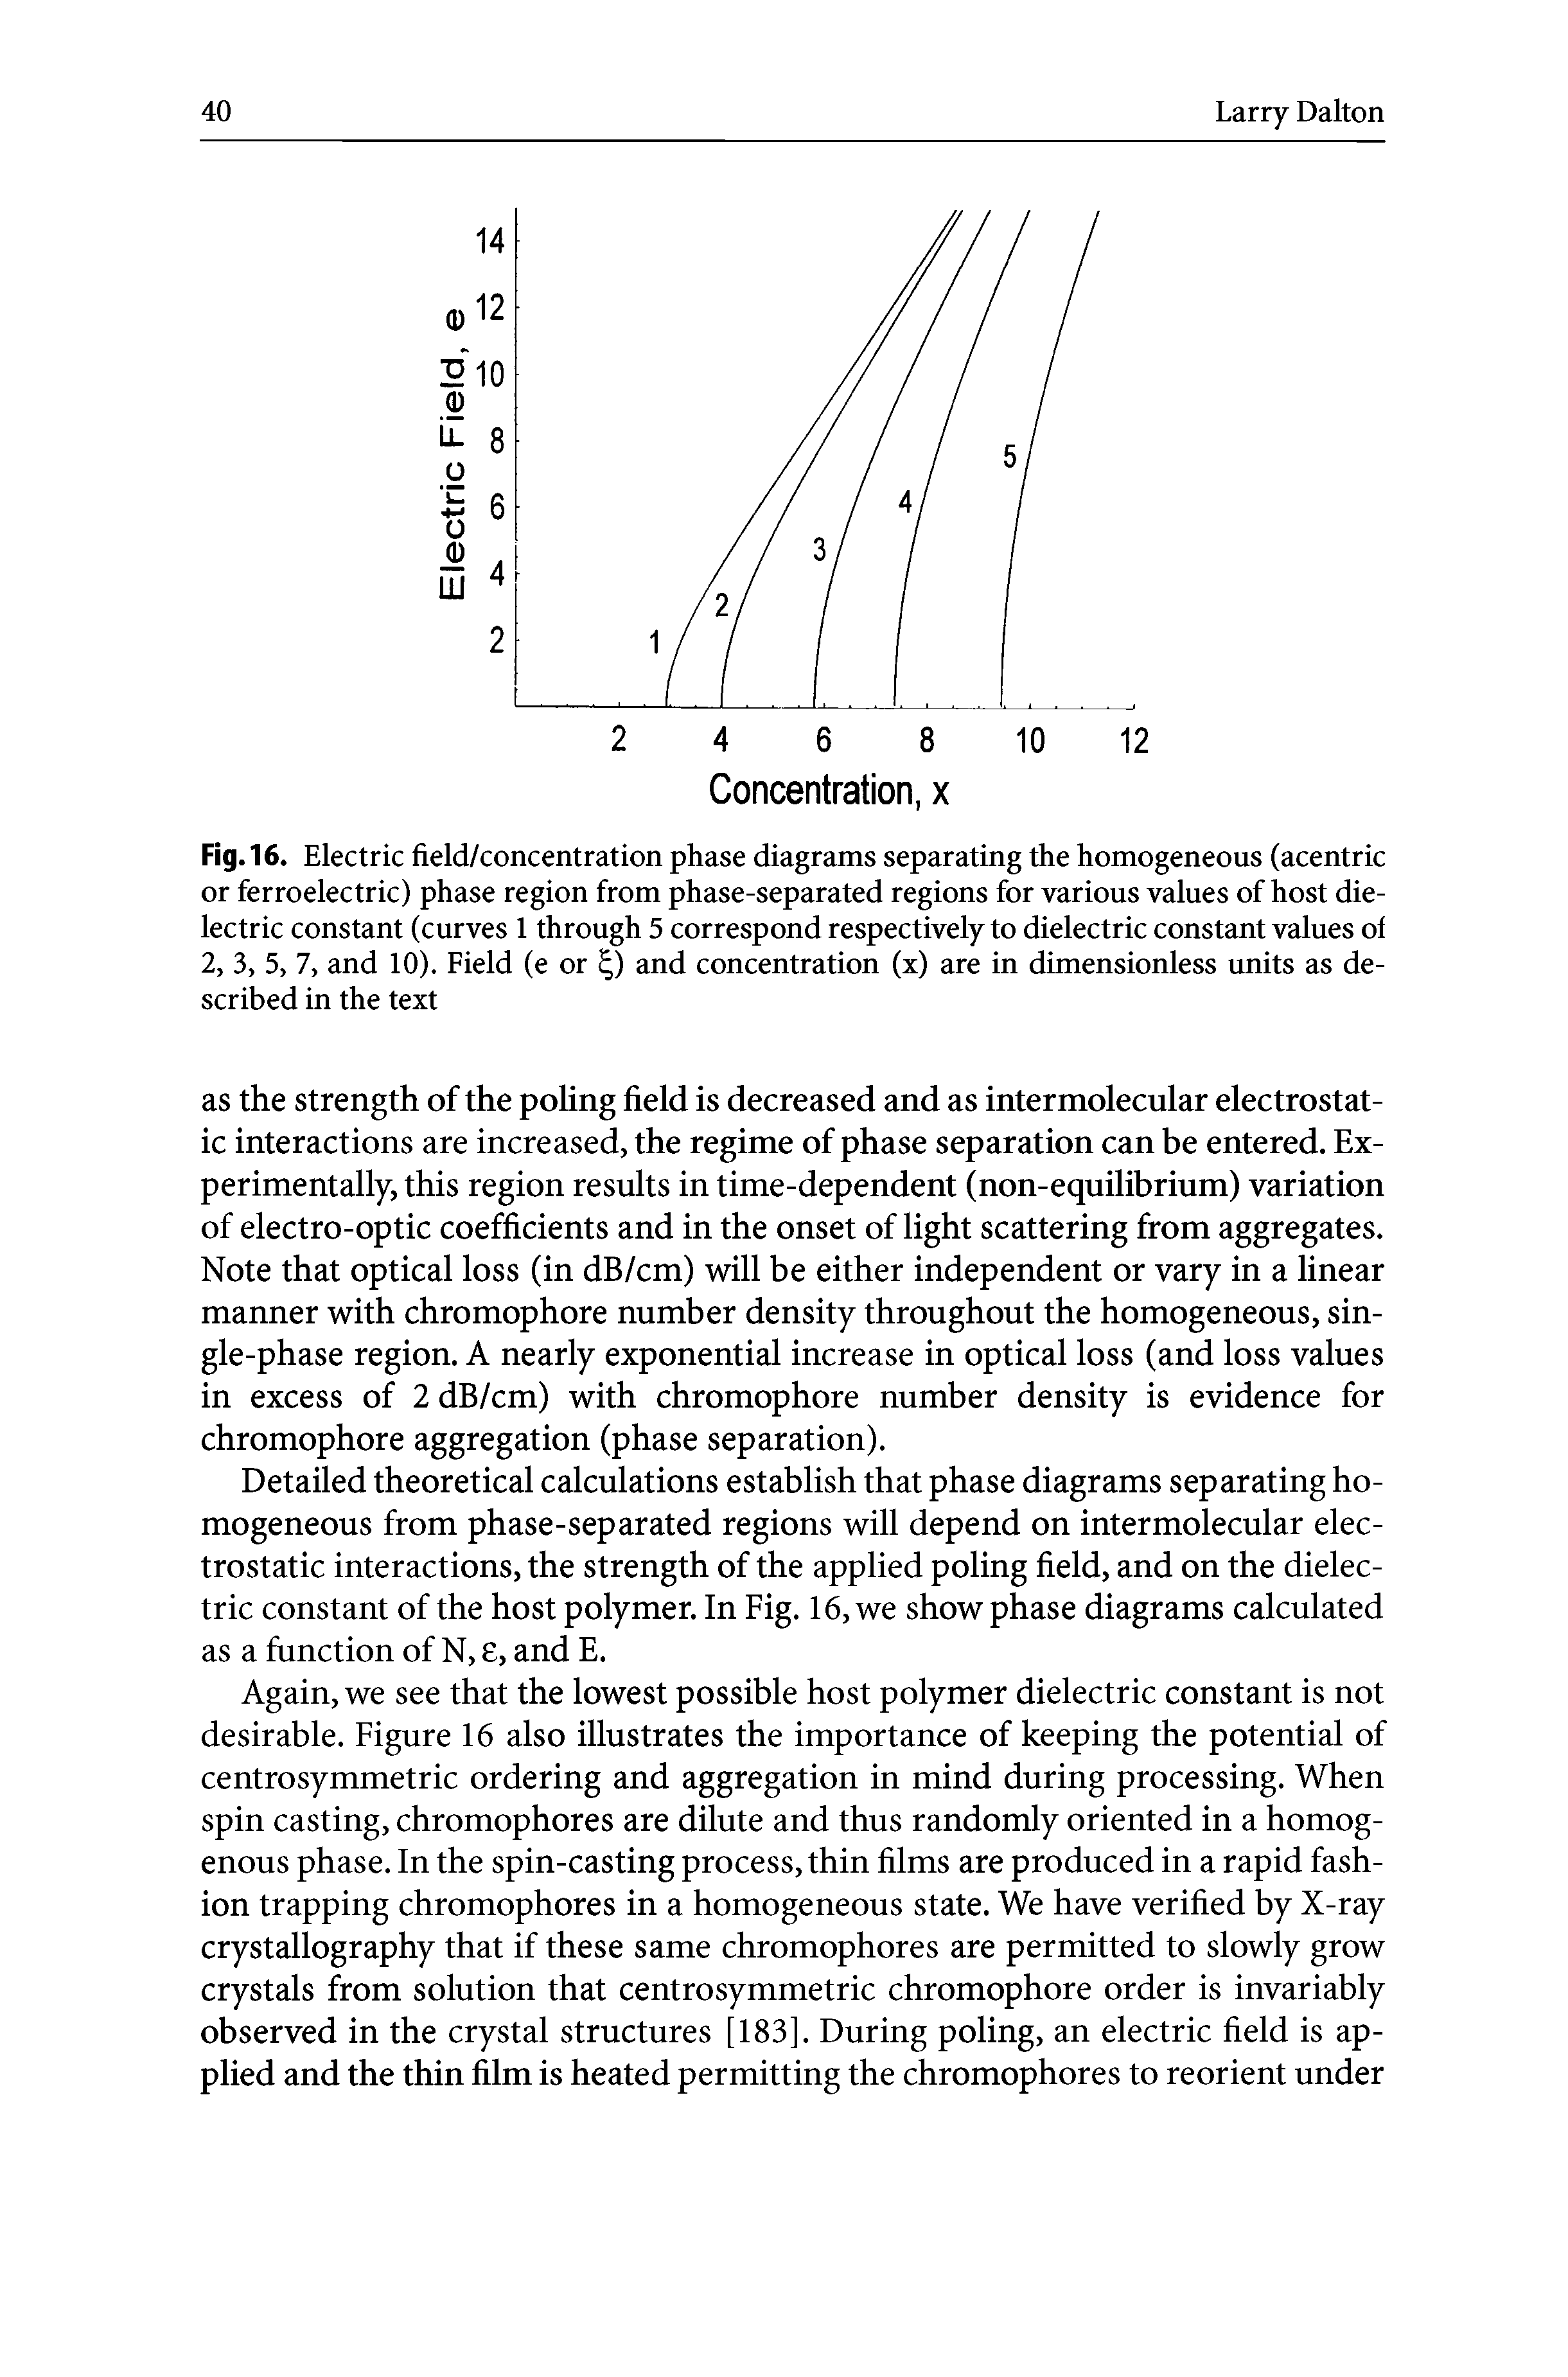 Fig. 16. Electric field/concentration phase diagrams separating the homogeneous (acentric or ferroelectric) phase region from phase-separated regions for various values of host dielectric constant (curves 1 through 5 correspond respectively to dielectric constant values ol 2, 3, 5, 7, and 10). Field (e or ,) and concentration (x) are in dimensionless units as described in the text...